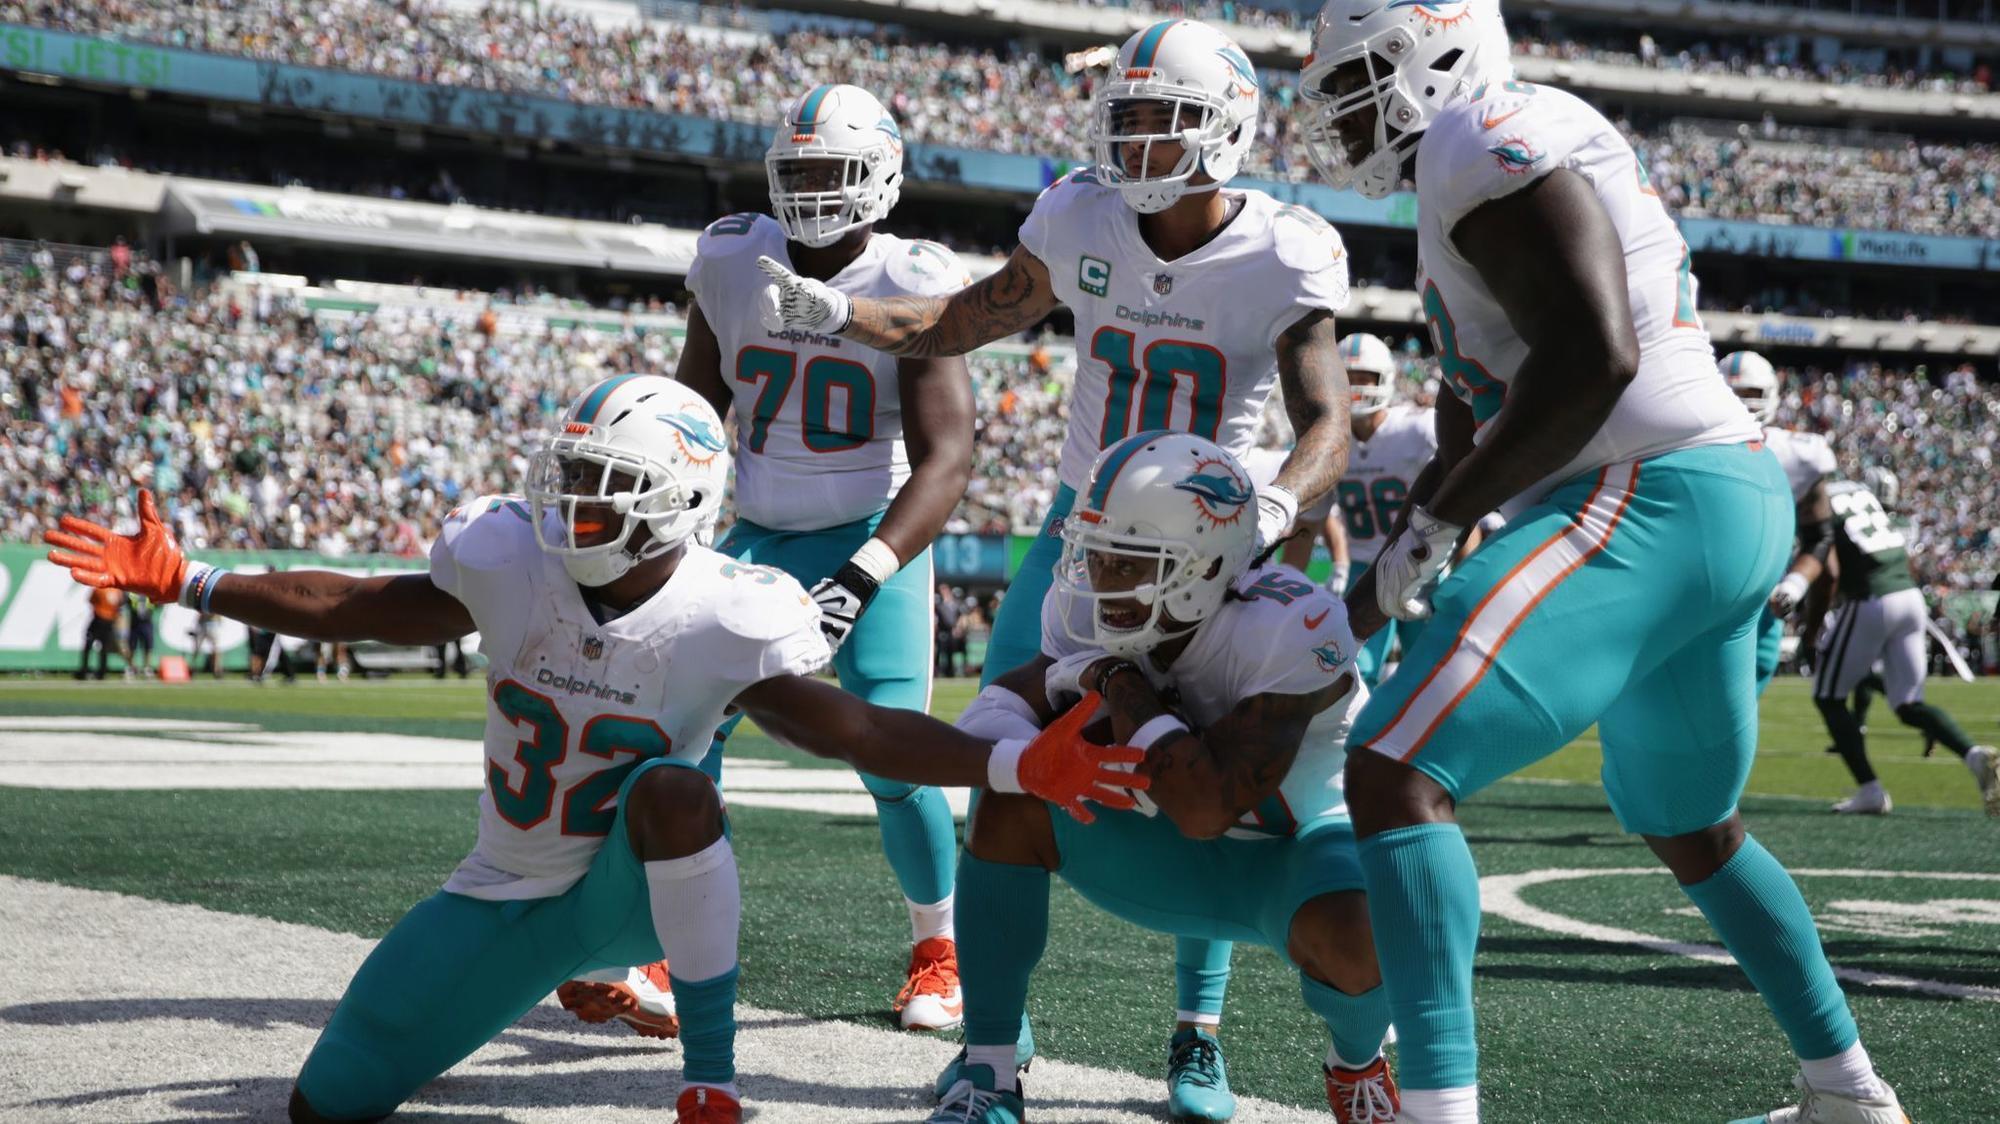 Dolphins celebrate Albert Wilson's touchdown by photo posing in end